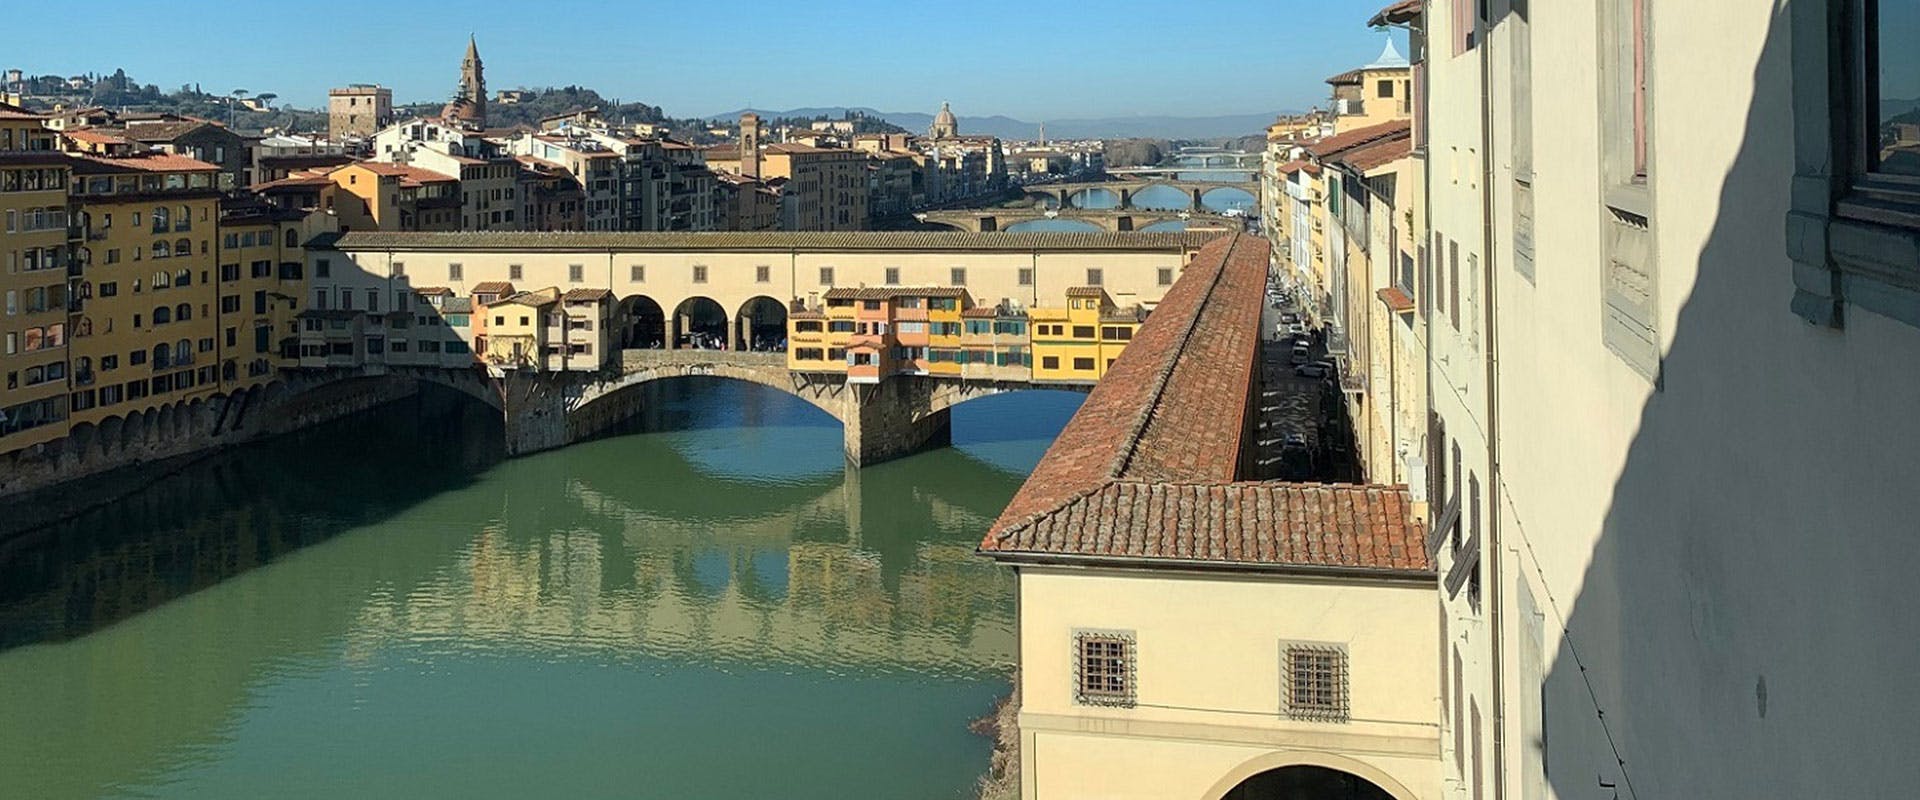 The works for the reopening of the Vasari Corridor of the Uffizi Galleries are about to start